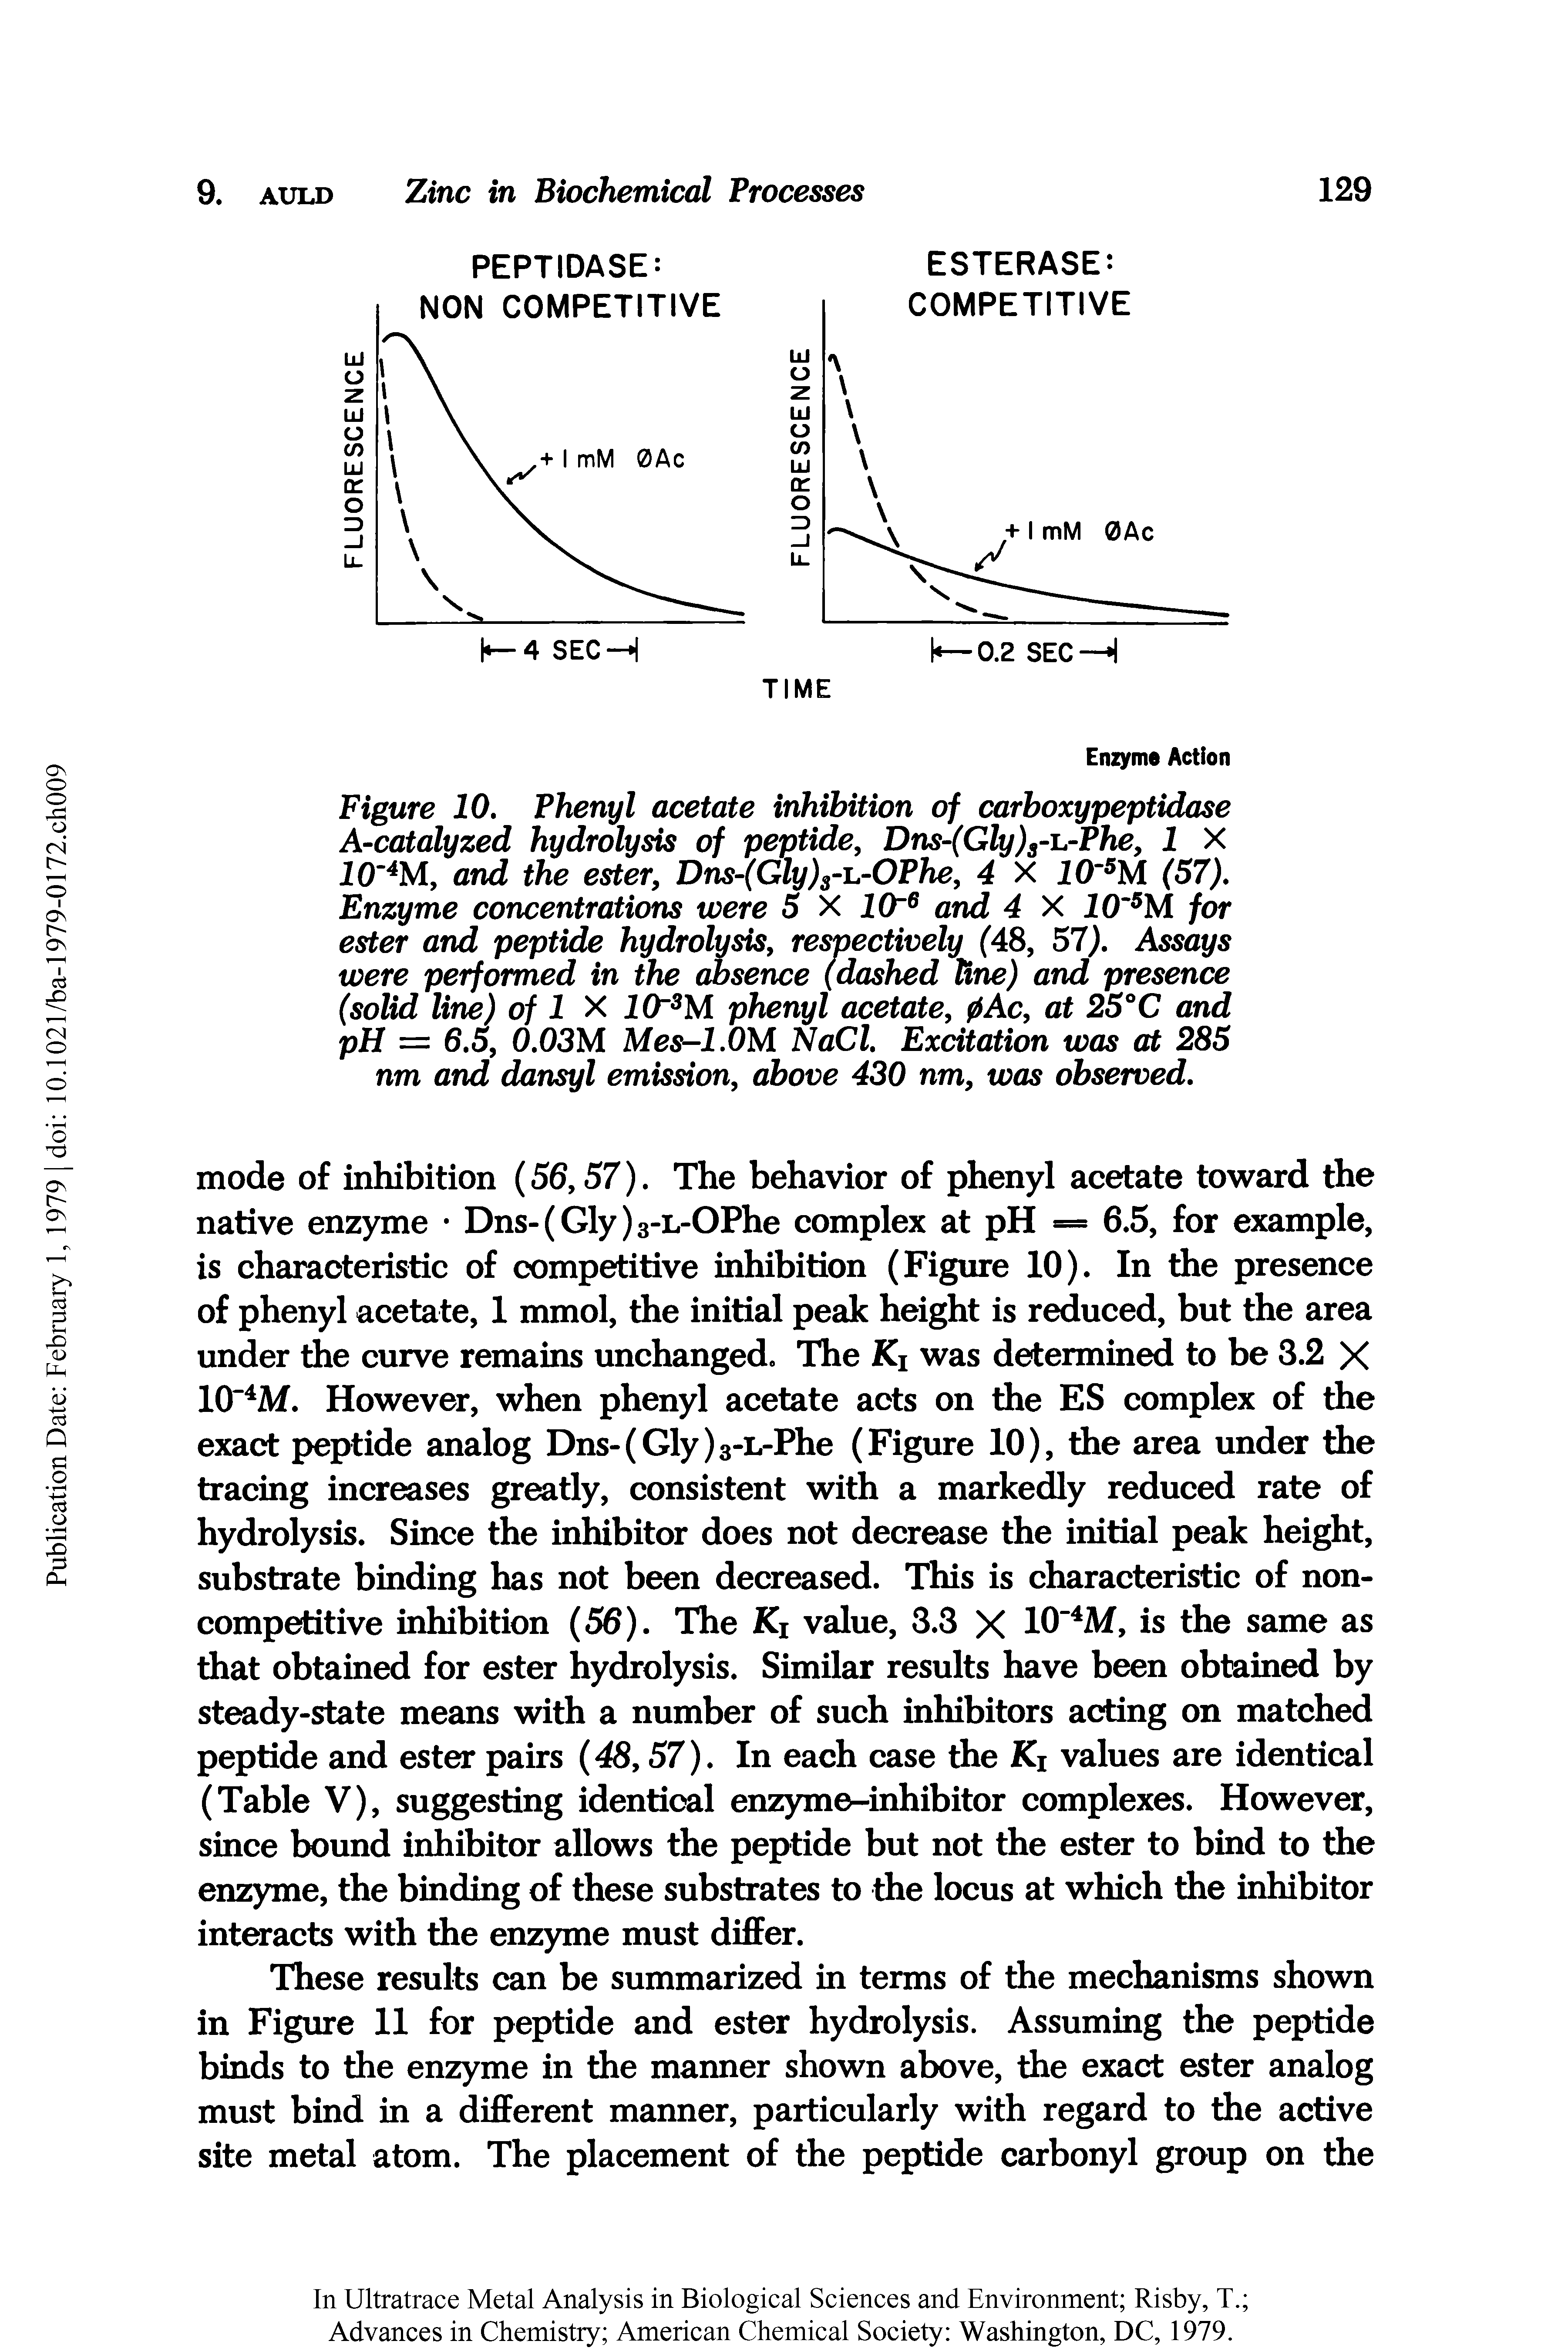 Figure 10, Phenyl acetate inhibition of carboxypeptidase A-catalyzed hydrolysis of peptide, Dns-(Gly)g-i.-Phe, 1 X and the ester, Dns-(Gly)3-L.-0Phe, 4 X iO M (57), Enzyme concentrations were 5 X iO" and 4 X IO" M for ester and peptide hydrolysis, respectively (48, 57). Assays were performed in the absence (dashed Une) and presence (solid line) of 1 X phenyl acetate, 0Ac, at 25°C and...